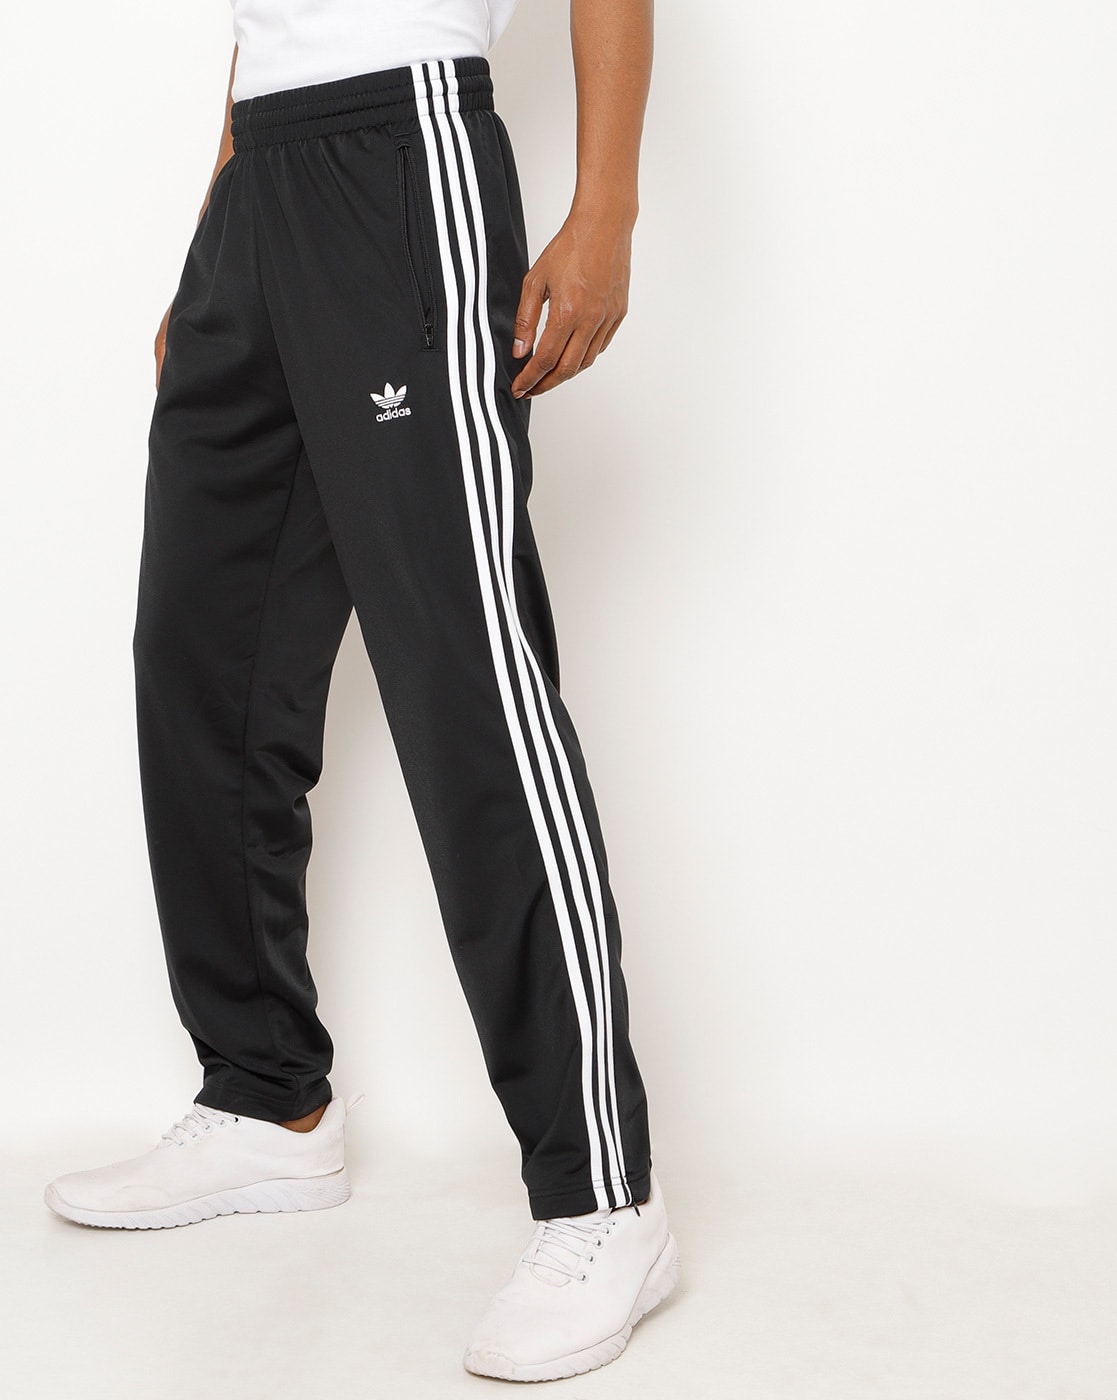 Reveal 210+ adidas track pants best